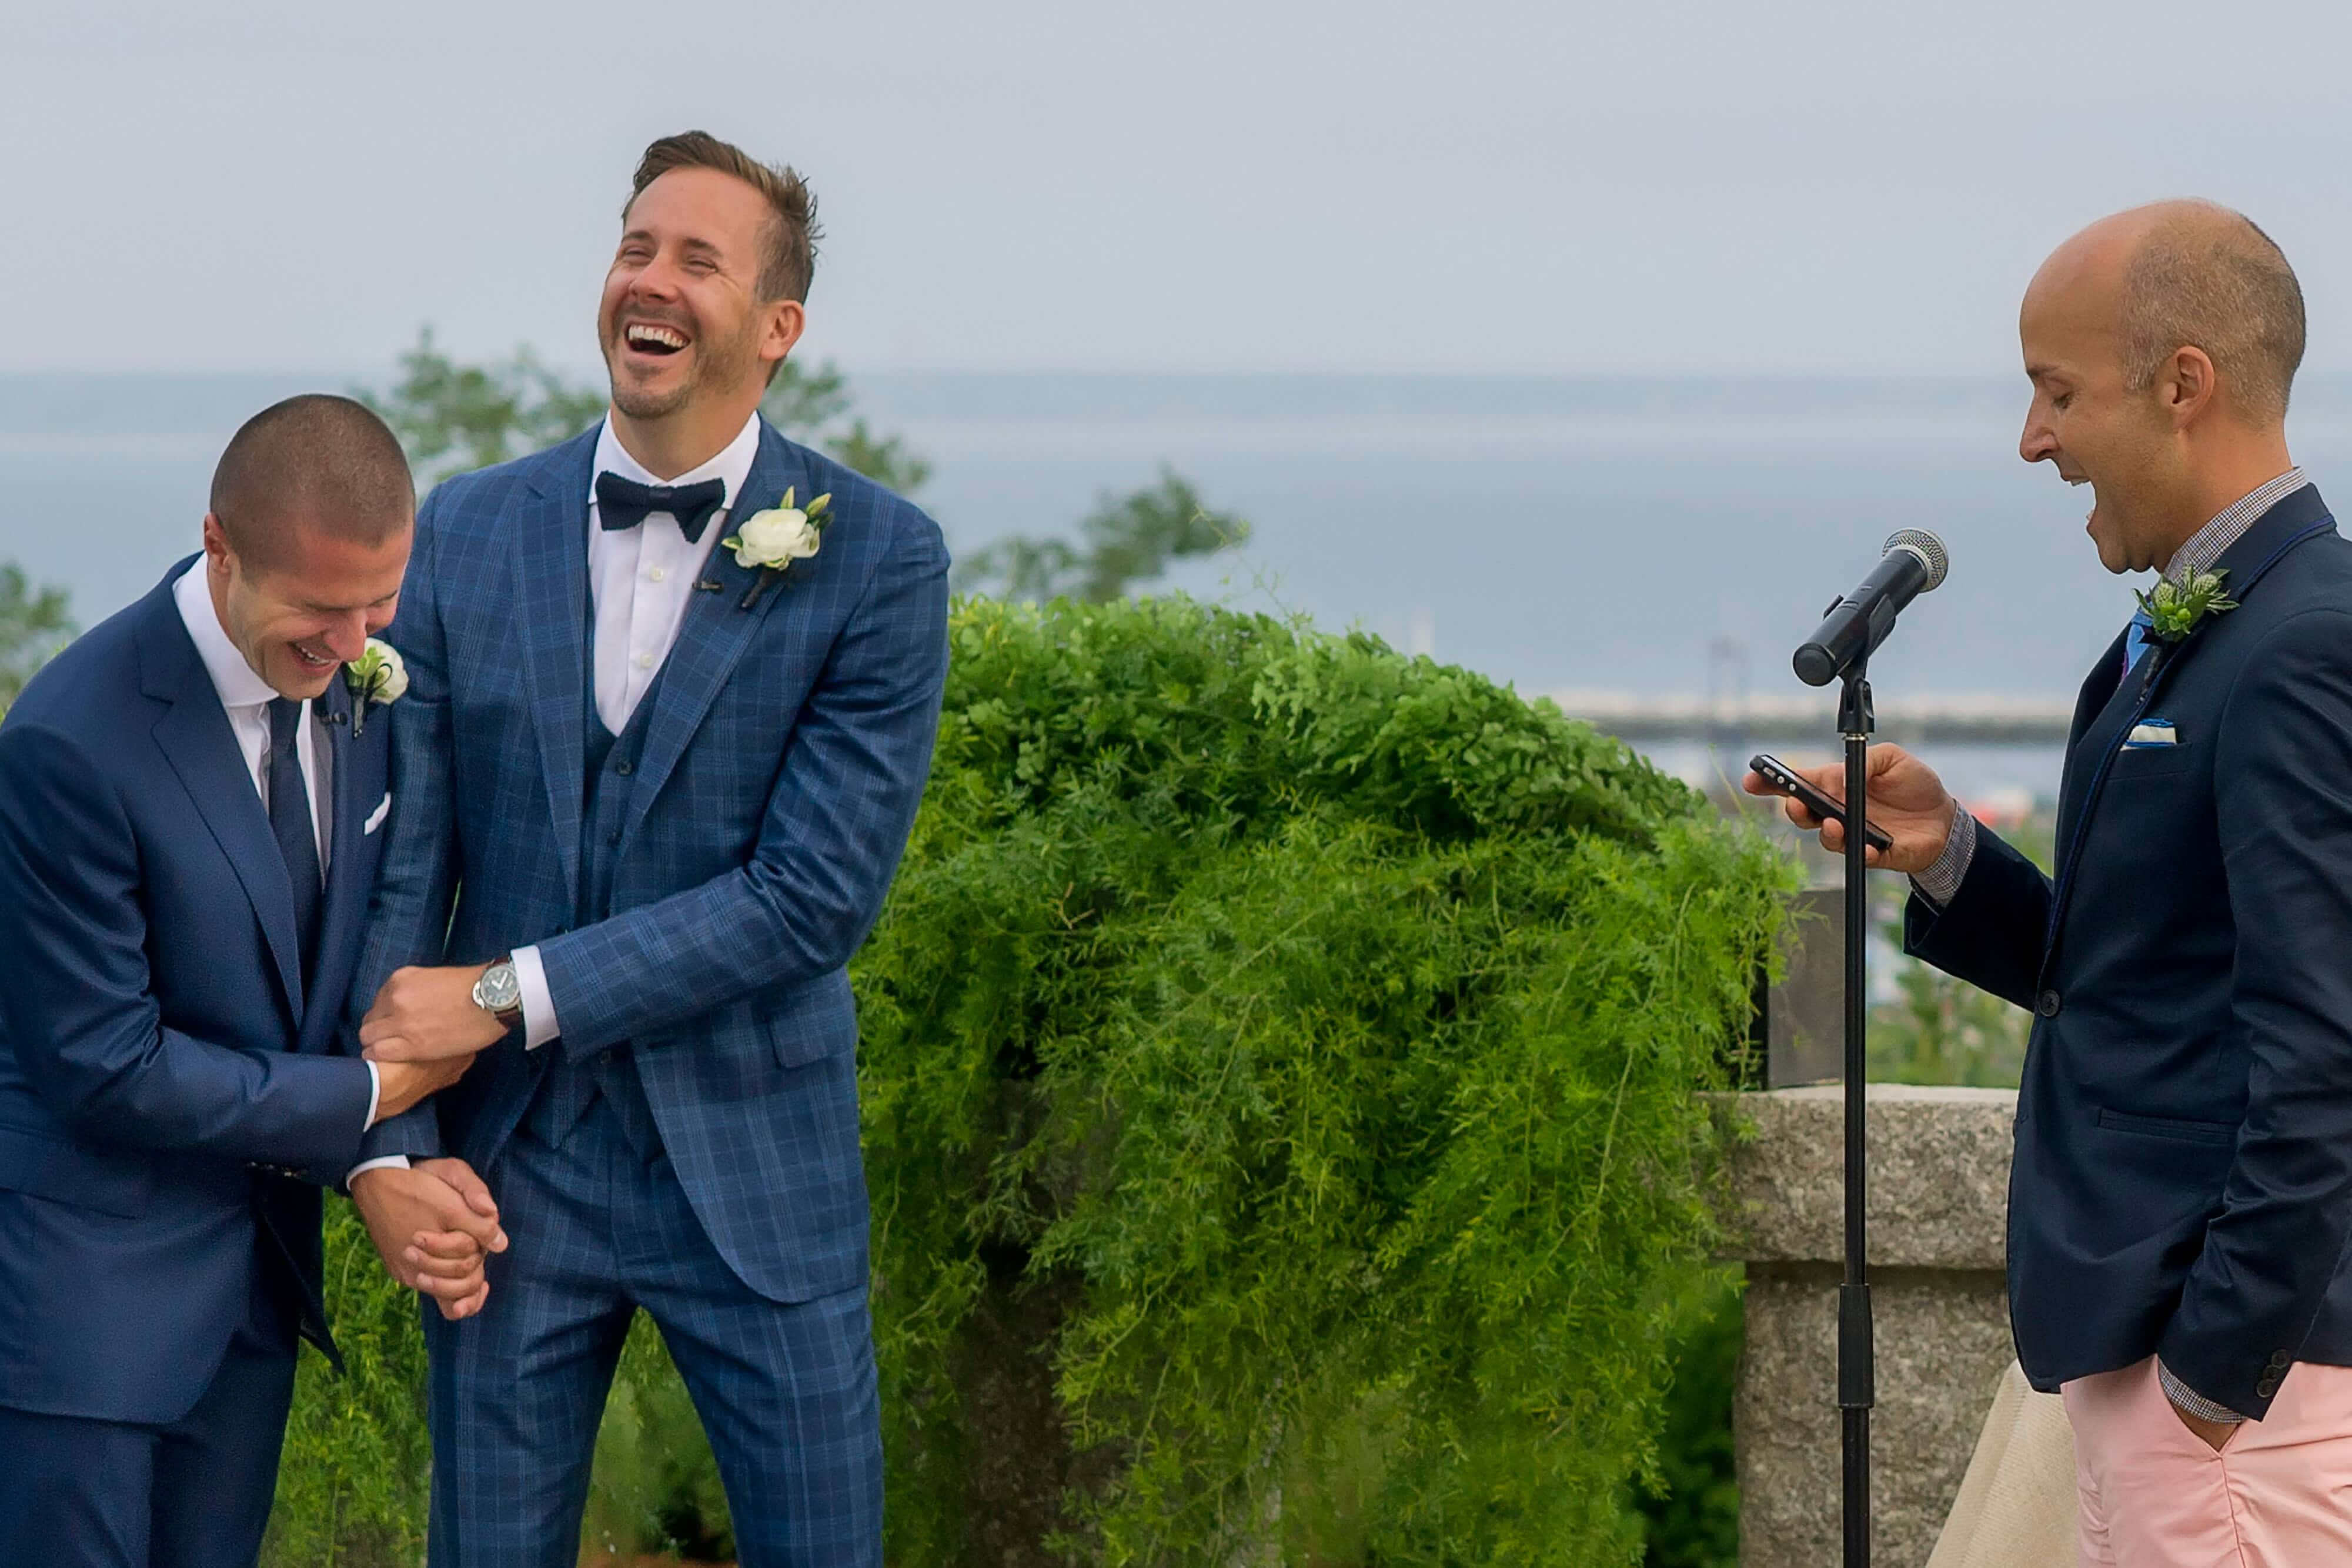 gay wedding ceremony photos at pilgrim monument in provincetown cape cod